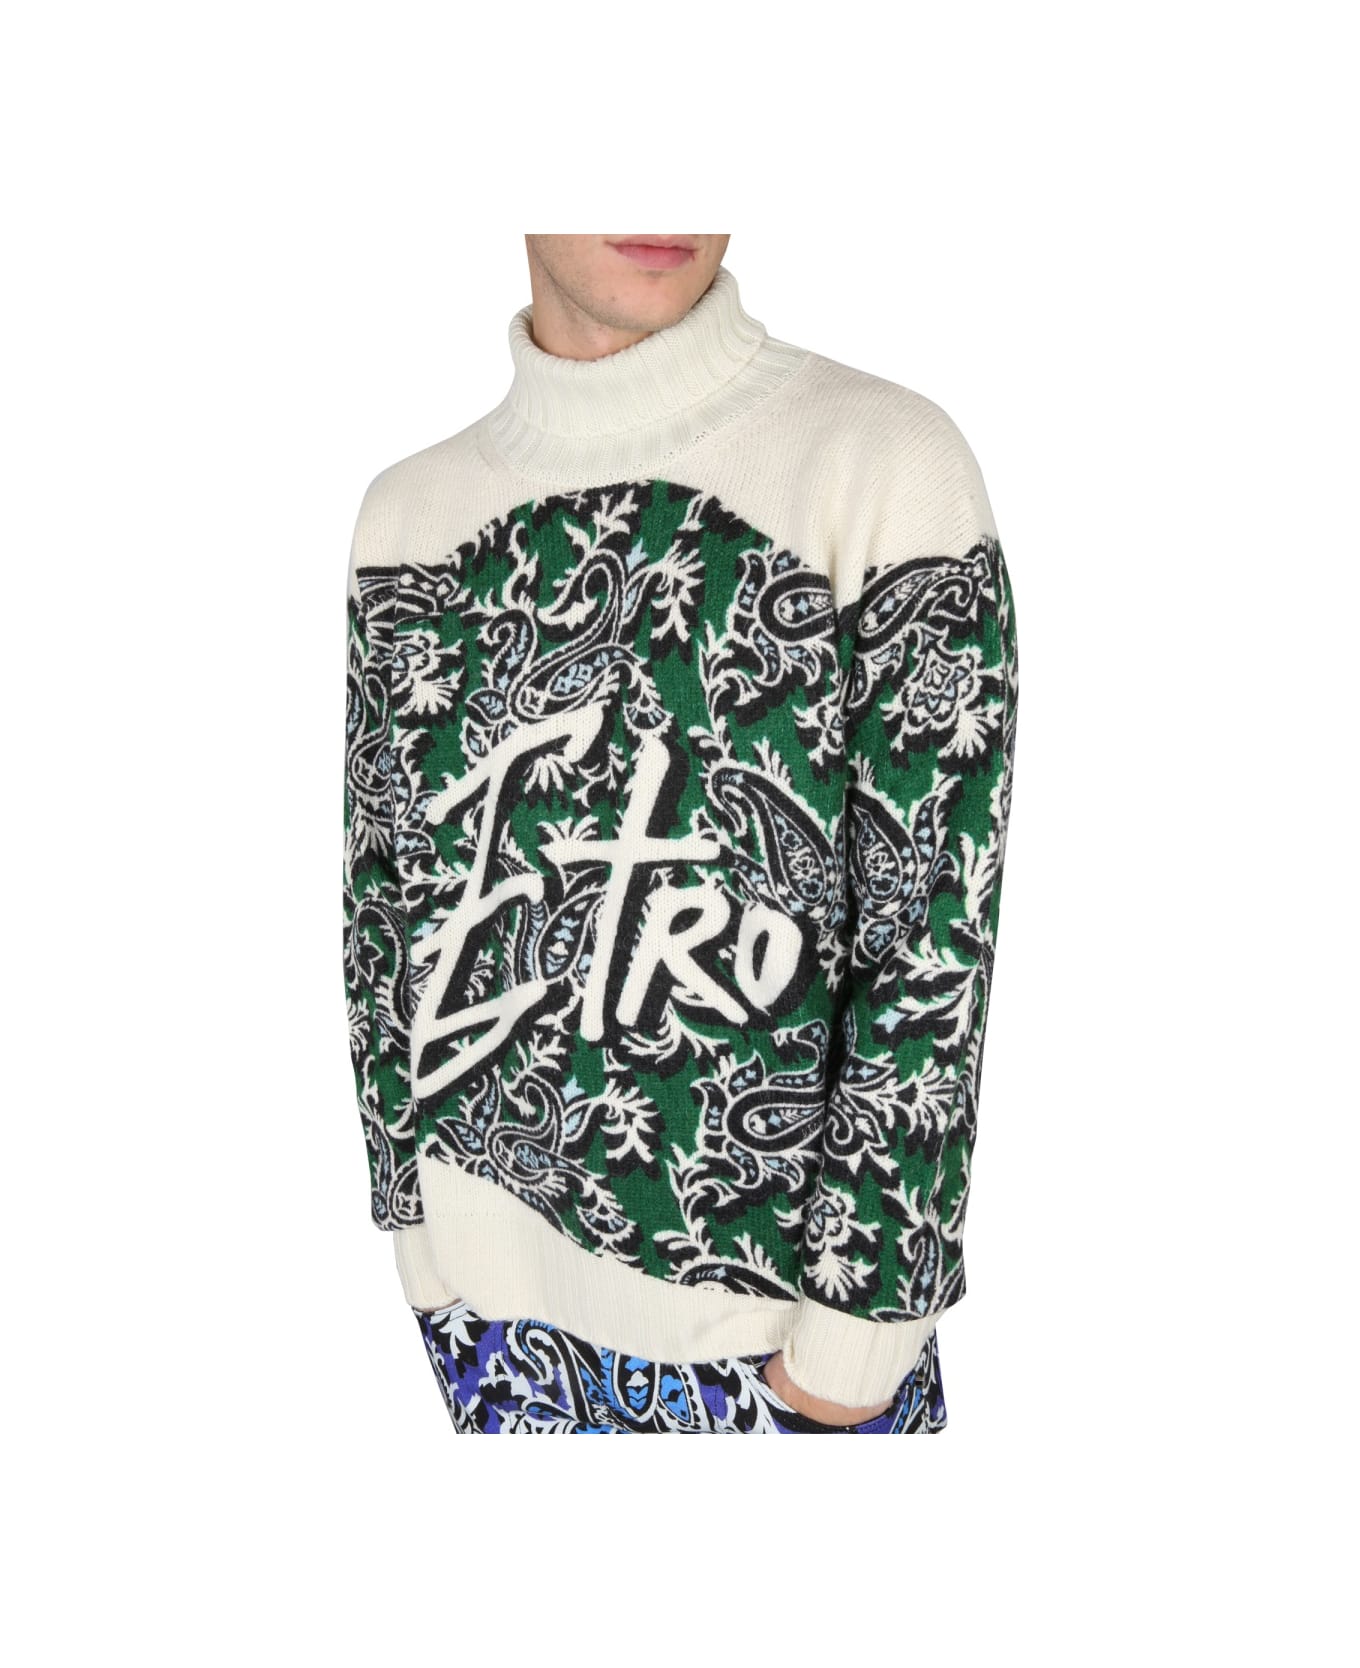 Etro Jersey With Logo And Paisley Print - GREEN